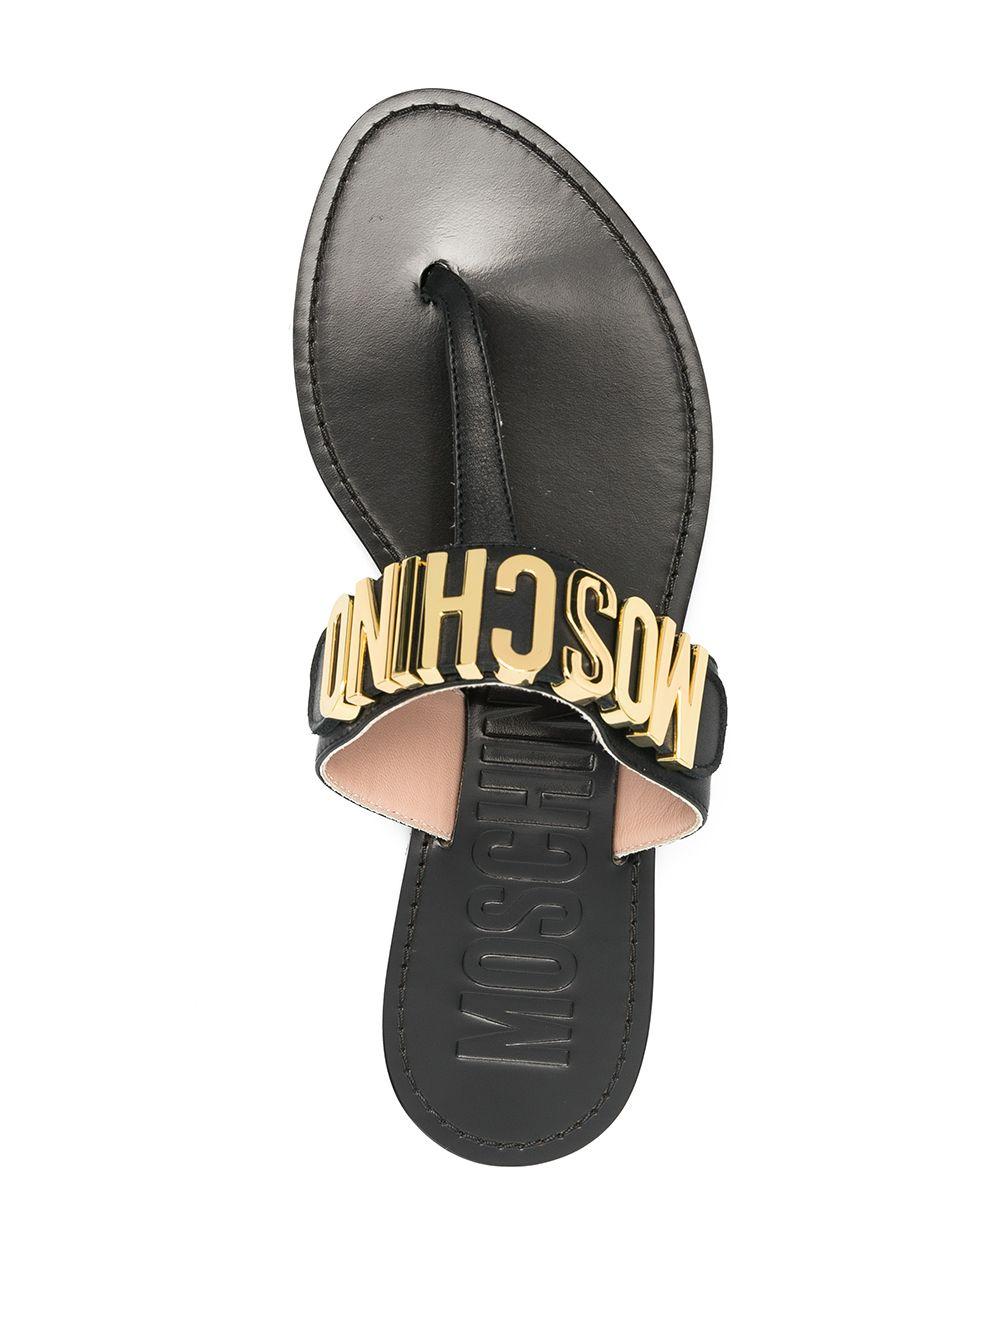 Moschino Logo Plaque Leather Thong Sandals | Lyst